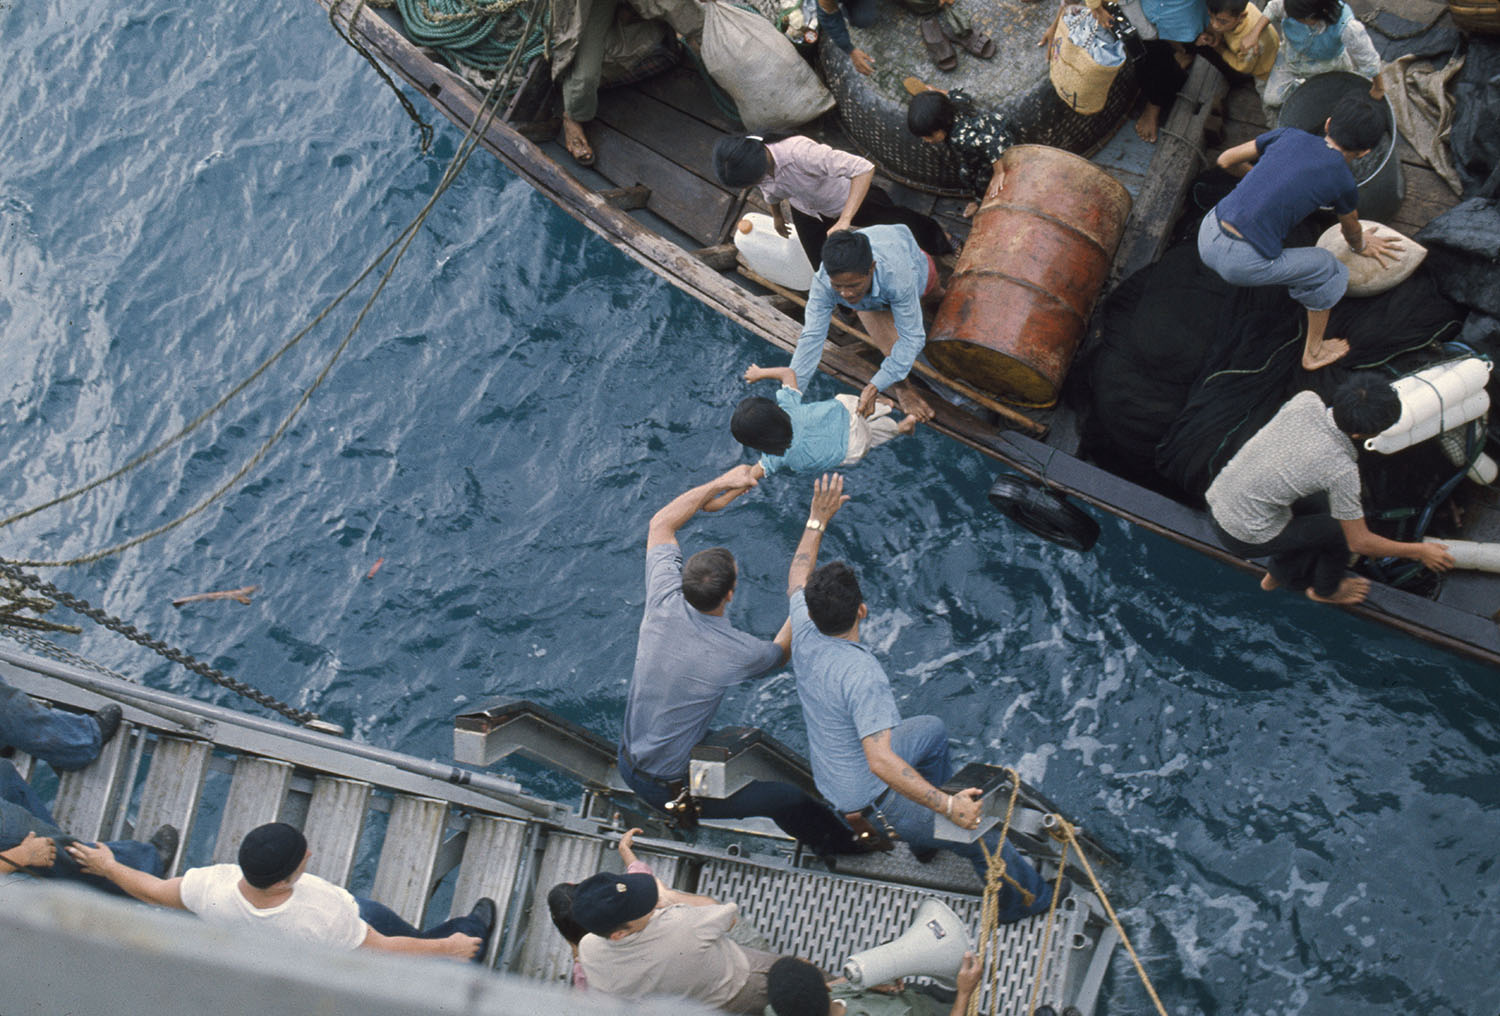 Crewmen of the amphibious cargo ship USS Durham take Vietnamese refugees from a small craft in the South China Sea, 1975